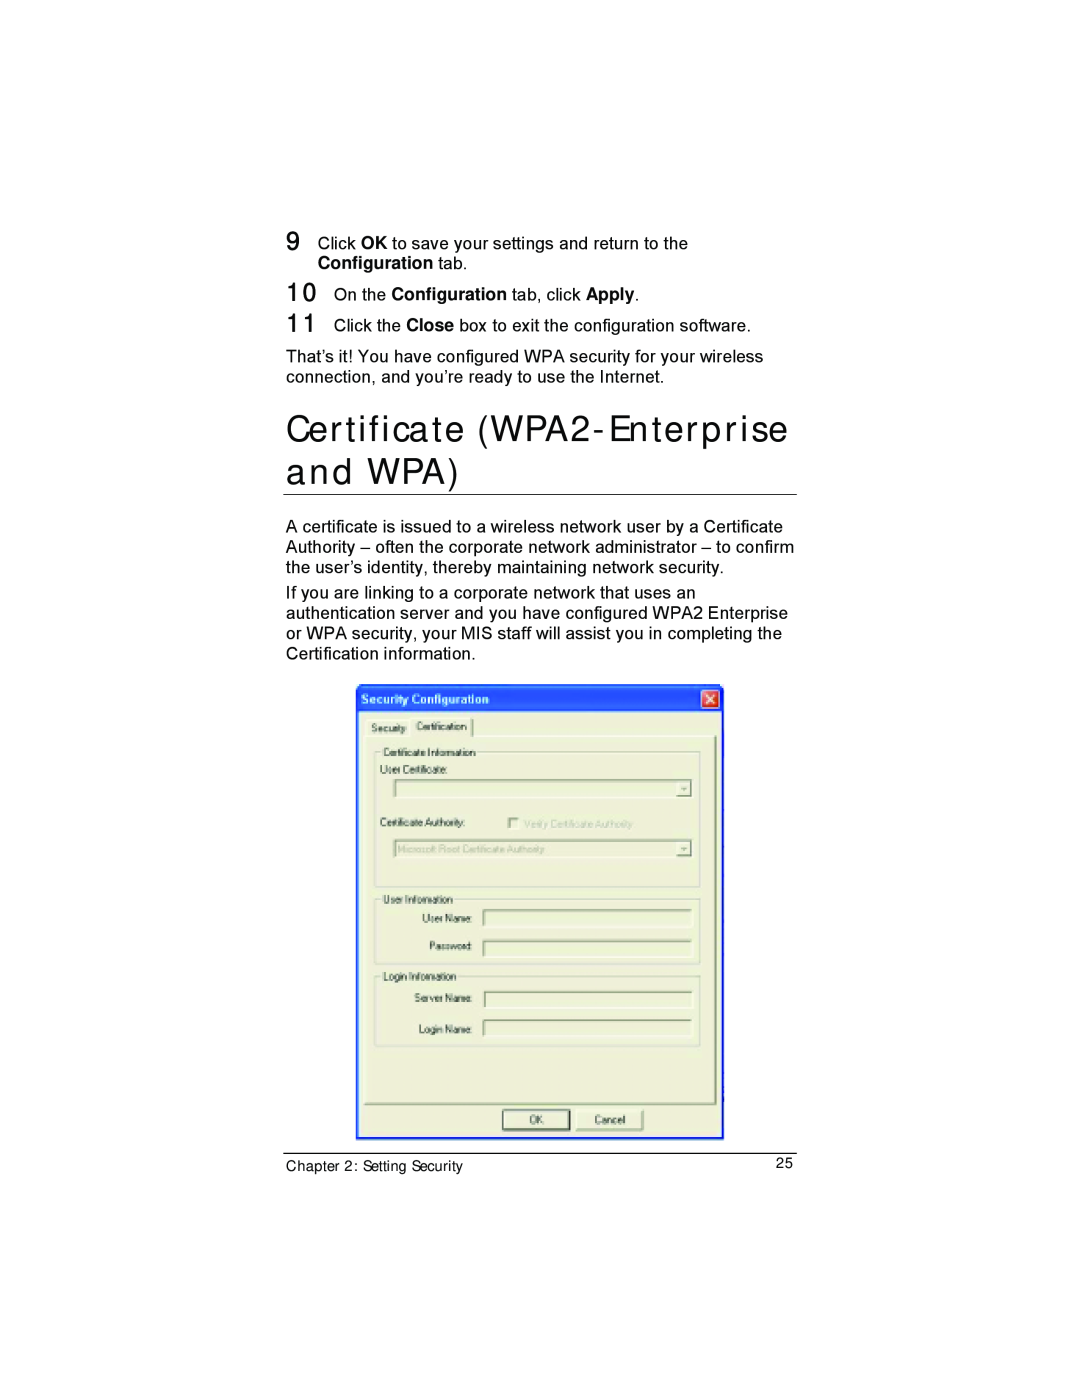 Zoom 4412A/TF manual Certificate WPA2-Enterprise and WPA 